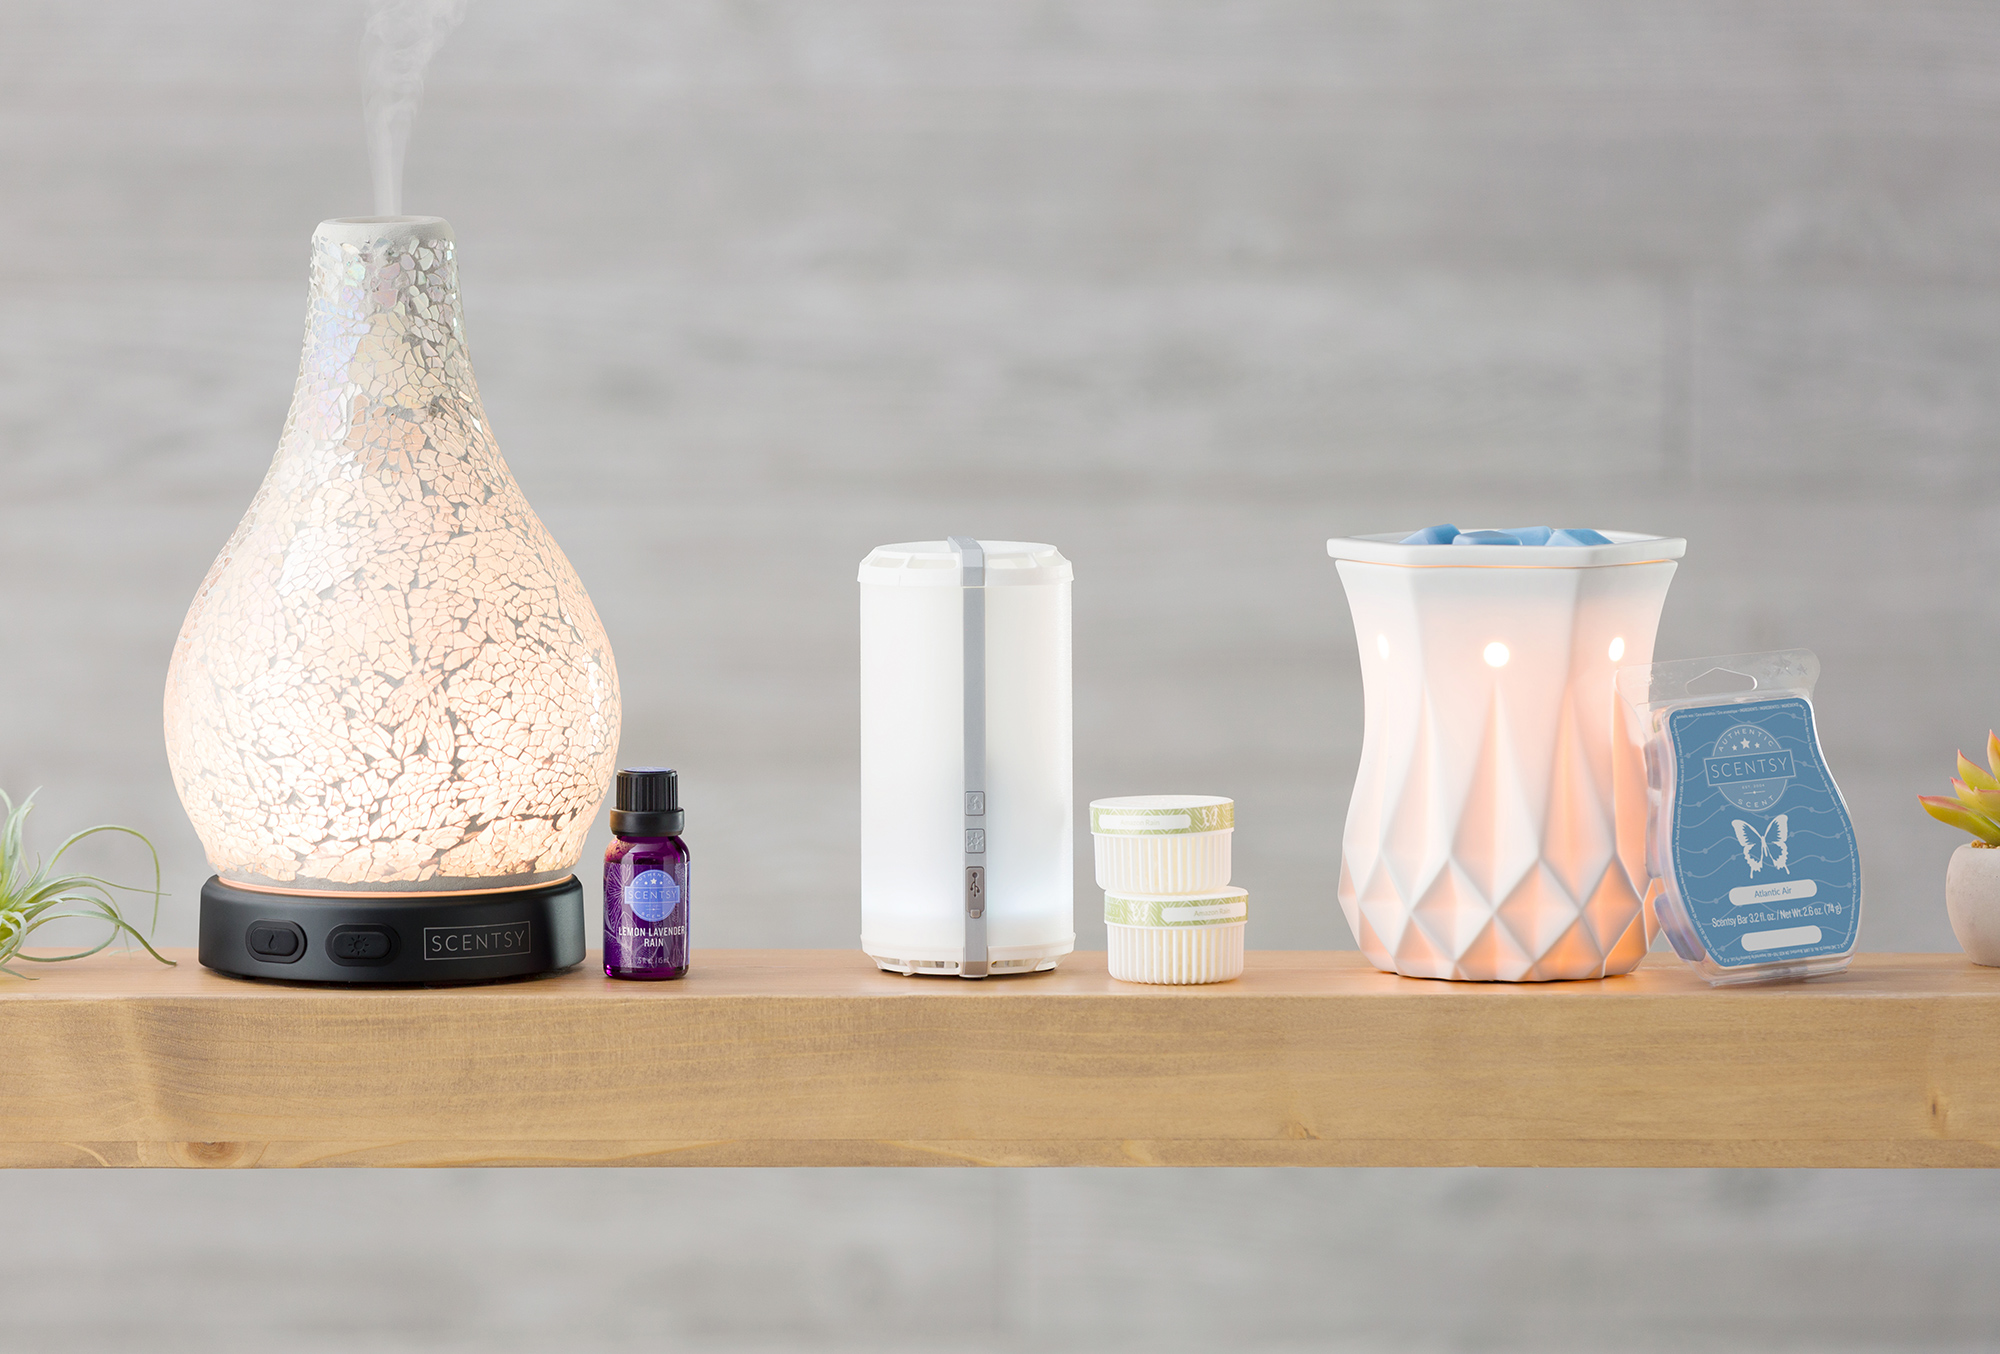 Which Scentsy System is right for you?